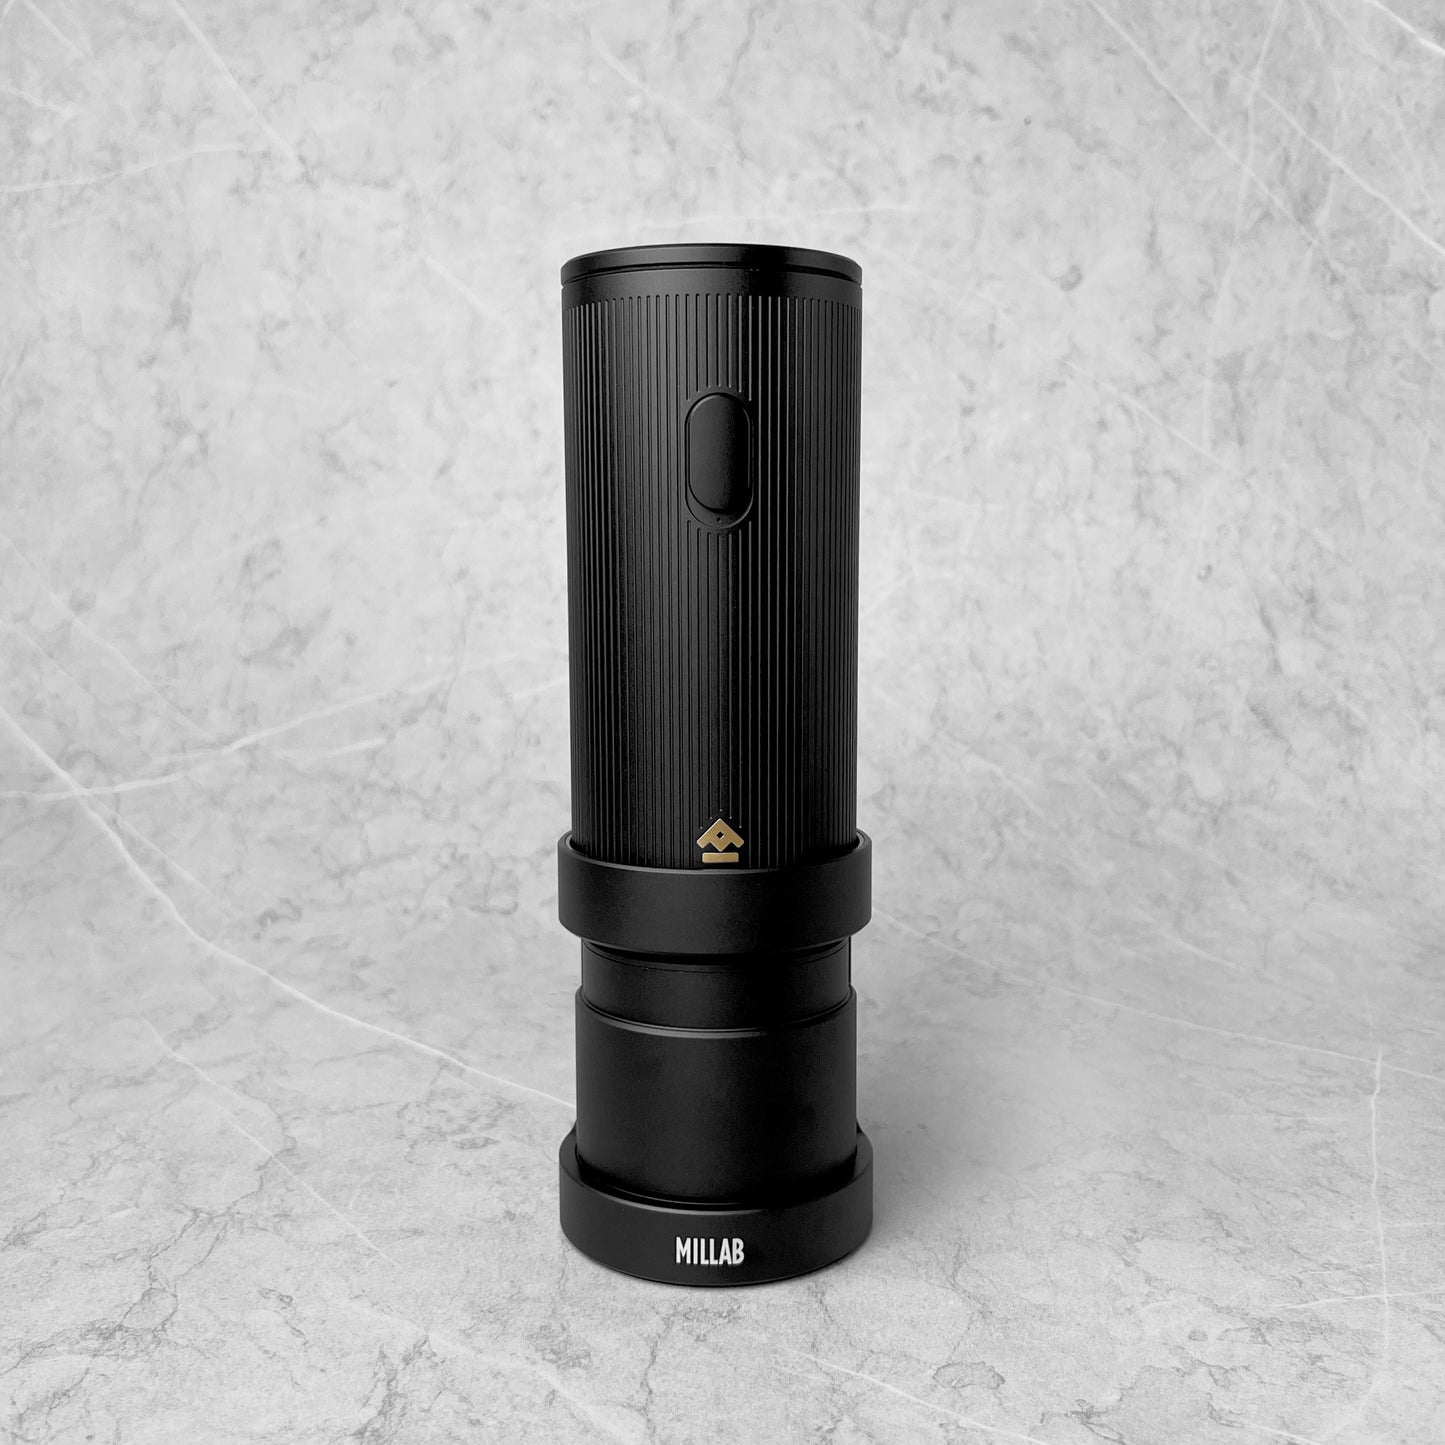 Millab x Timemore E01 Electric Coffee Grinder